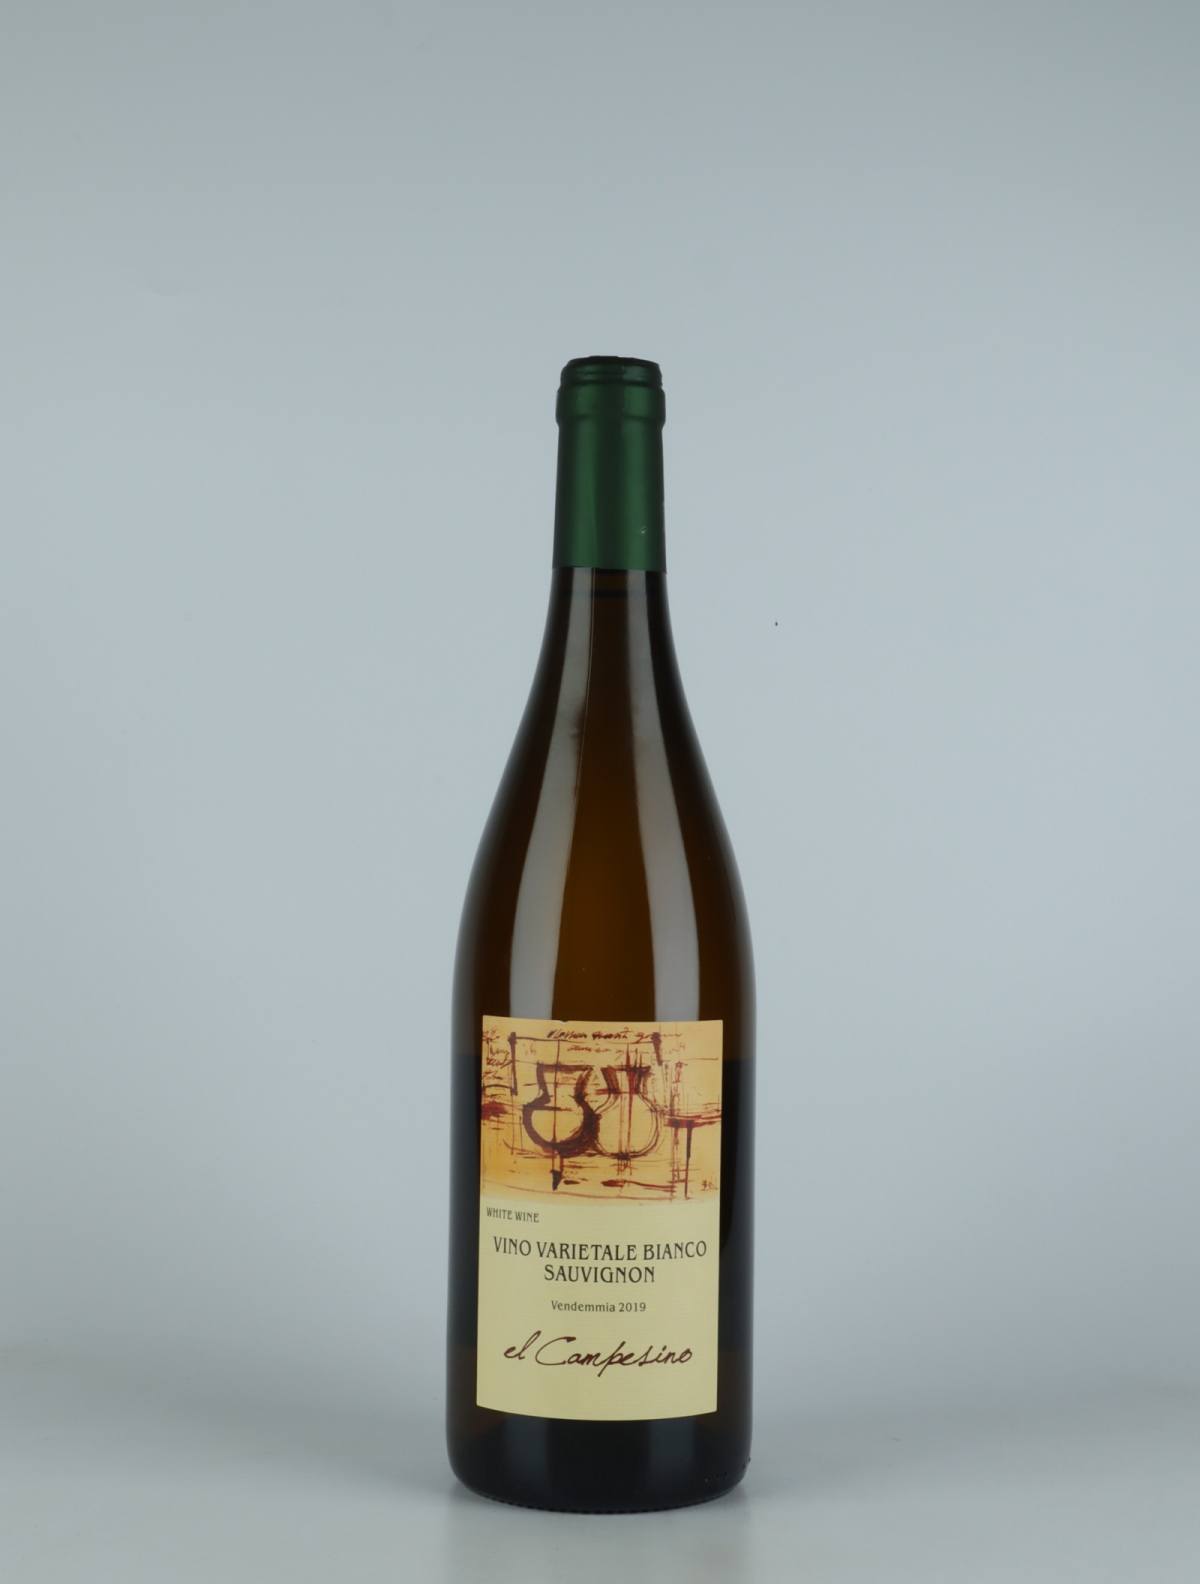 A bottle 2019 El Campesino Orange wine from Andrea Scovero, Piedmont in Italy